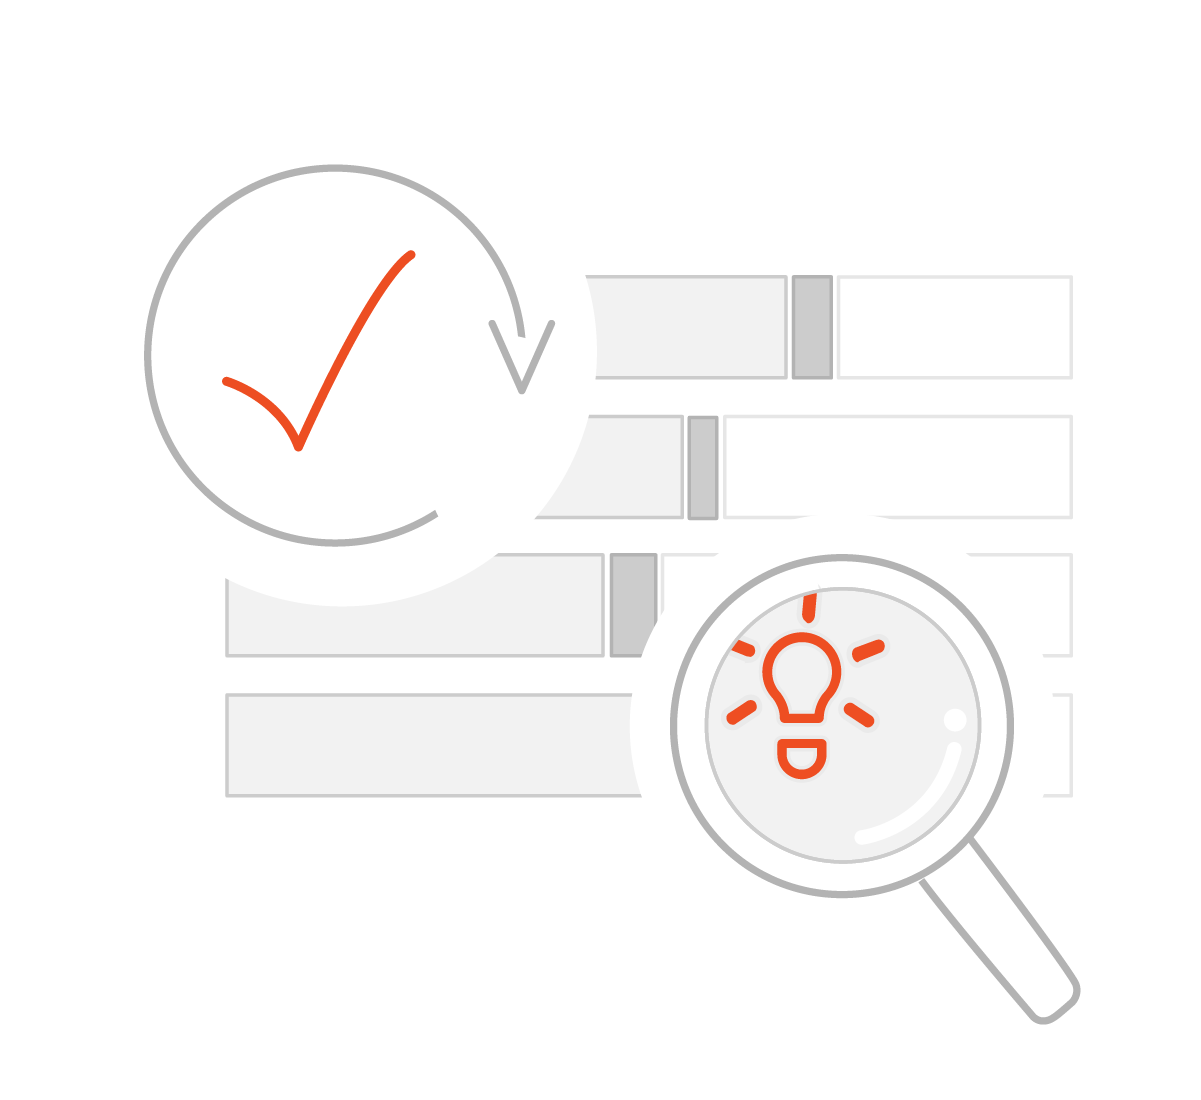 A vector image showing progress bars, a check mark, and a light bulb underneath a magnifying glass.